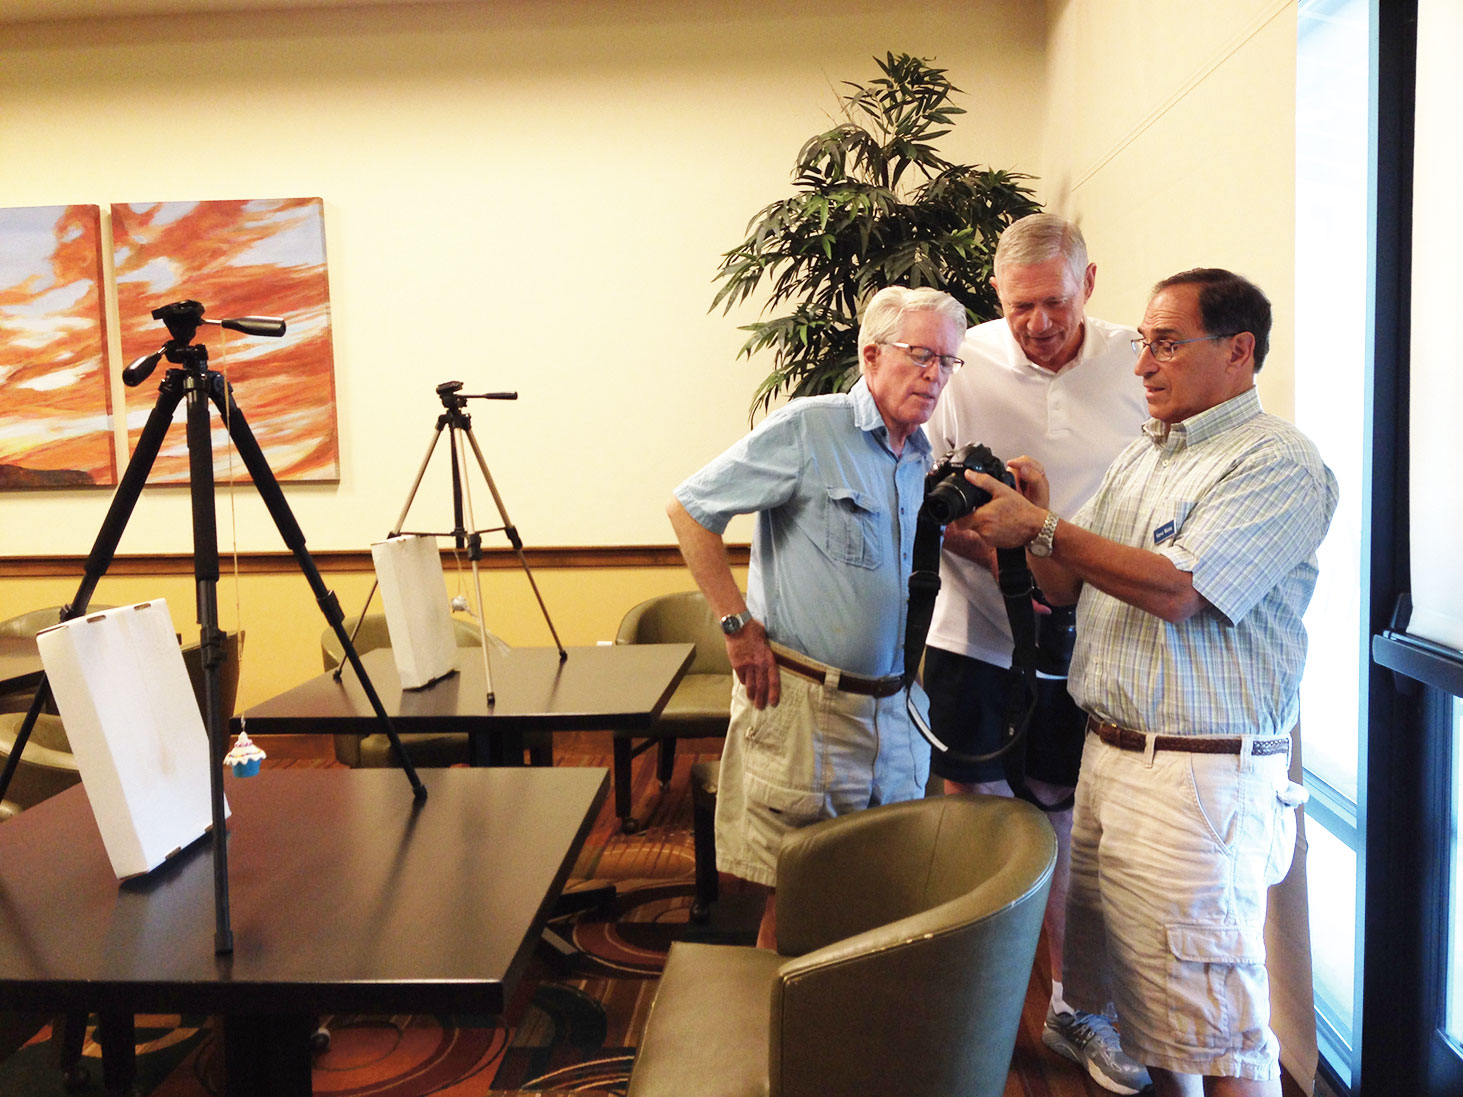 SBR residents discussing various aspects of photography